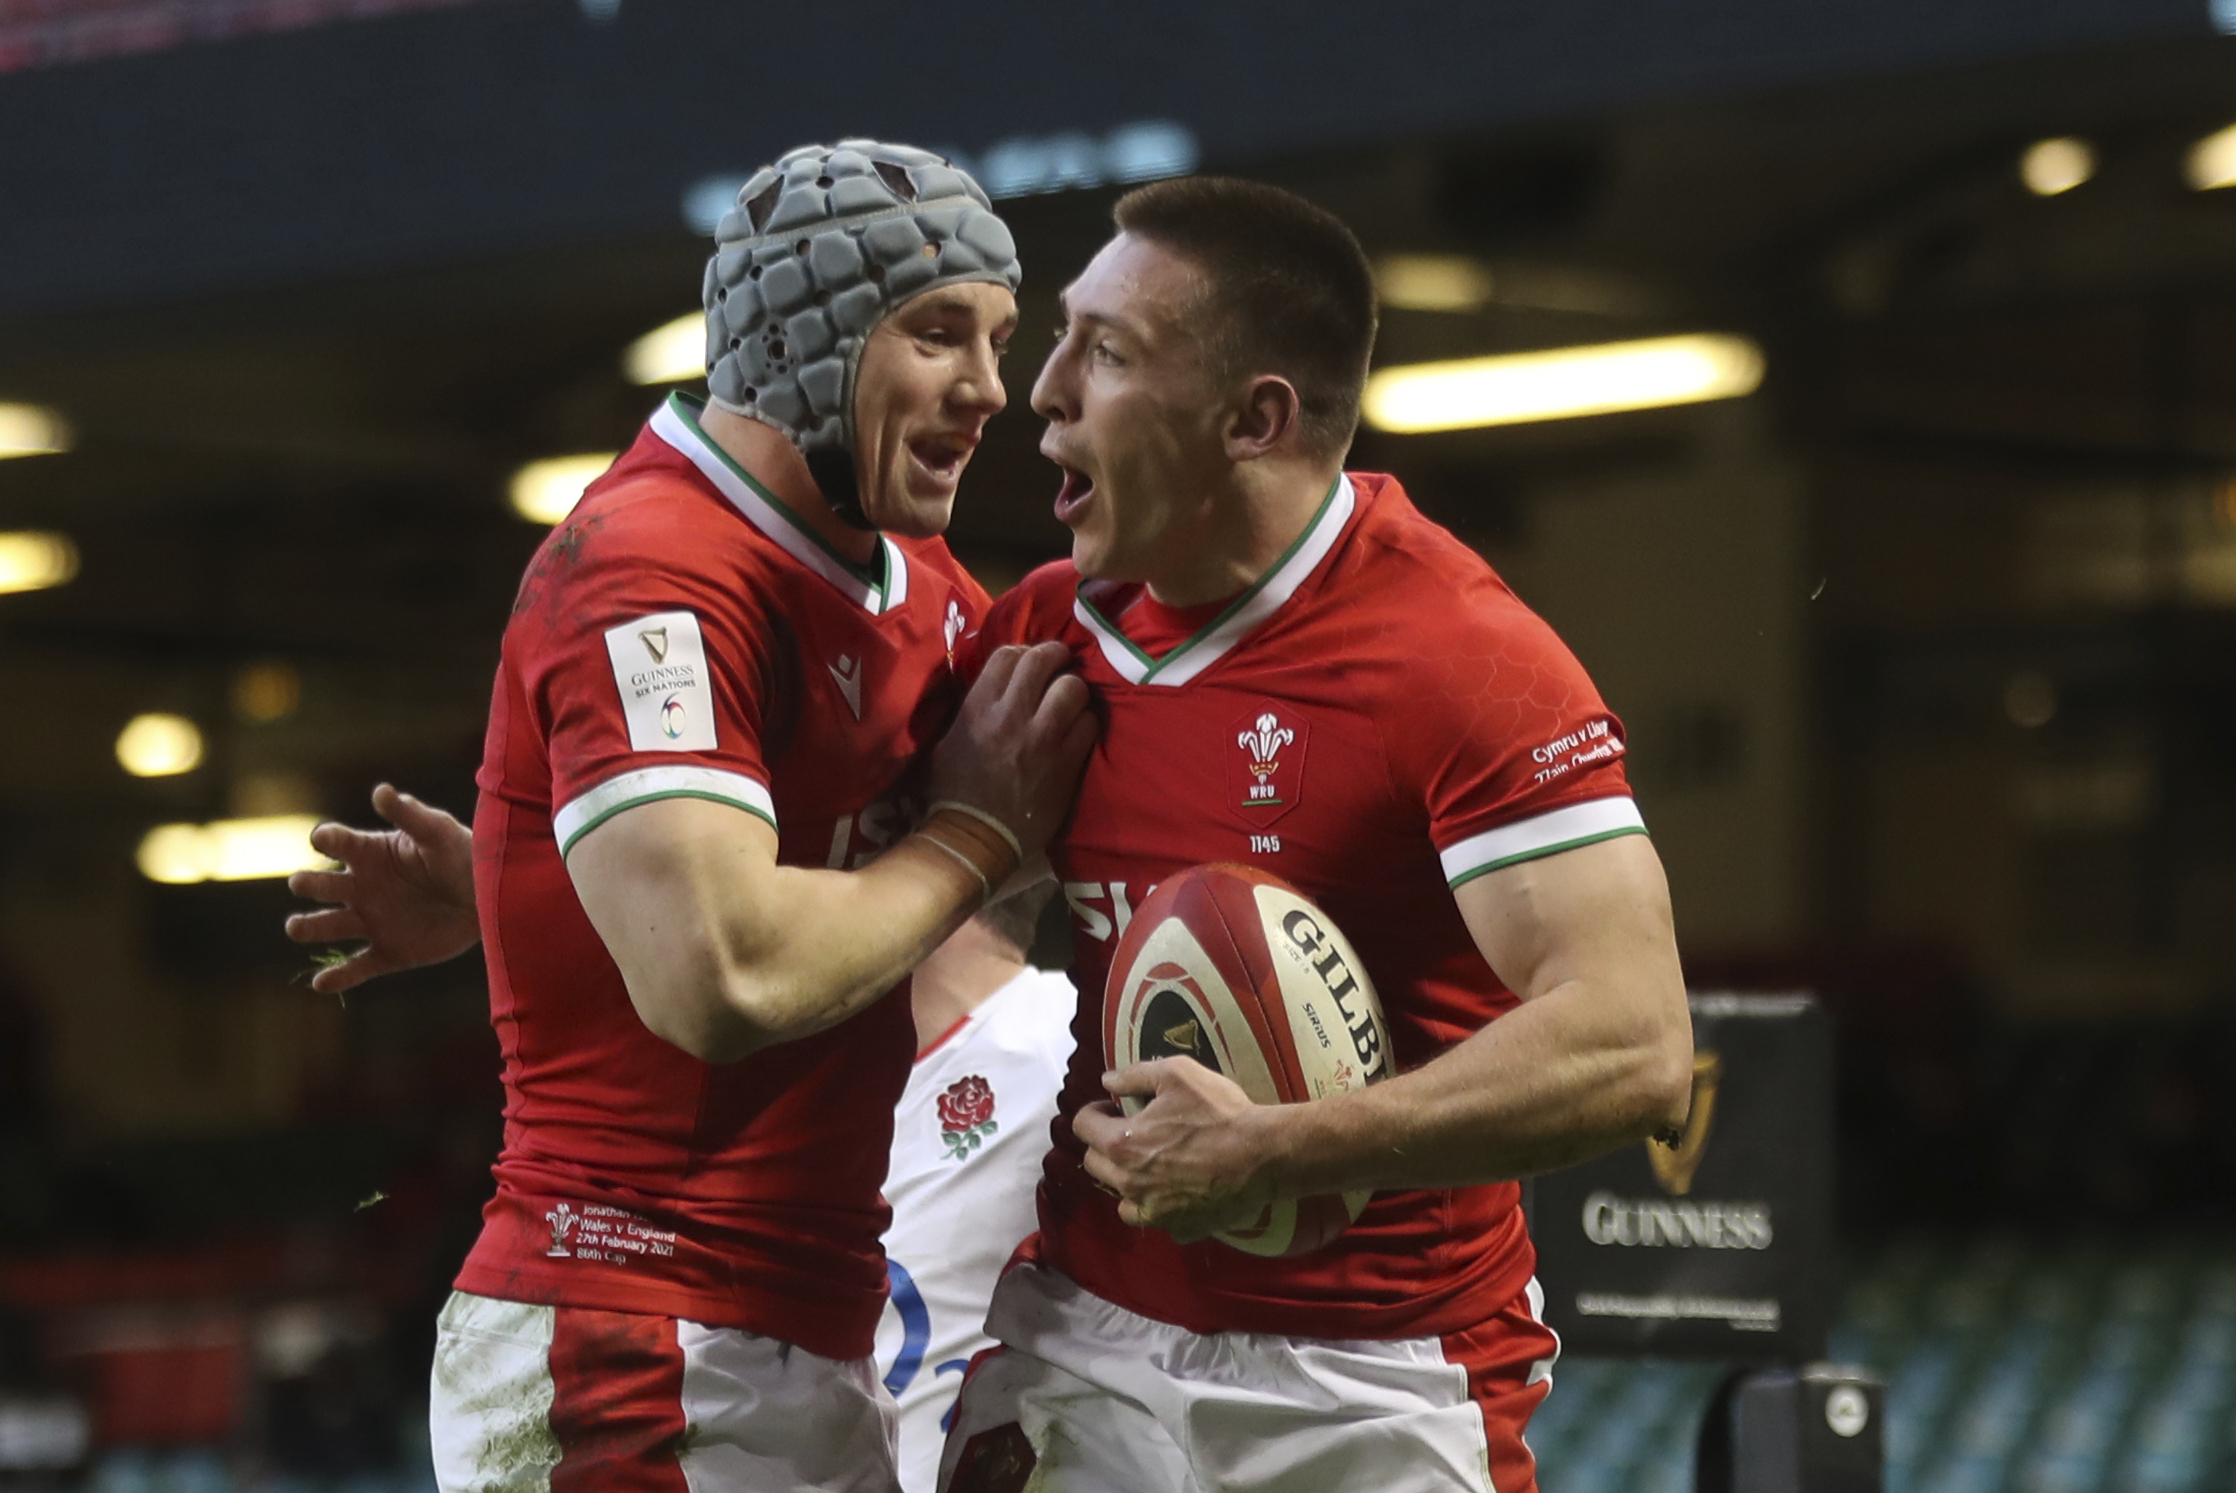 FILE -Wales' Josh Adams, right celebrates after scoring the opening try with teammate Wales' Jonathan Davies during the Six Nations rugby union match between Wales and England at the Millennium stadium in Cardiff, Wales, Saturday, Feb. 27, 2021. Ahead of the upcoming Six Nations, Four teams stand out. England is the highest ranked, Ireland is on an eight-test winning run, France is improving quicker than any test nation ahead of hosting next year’s Rugby World Cup, and Wales has pedigree with four titles in the last 10 years. (David Davies/Pool Via AP, File )